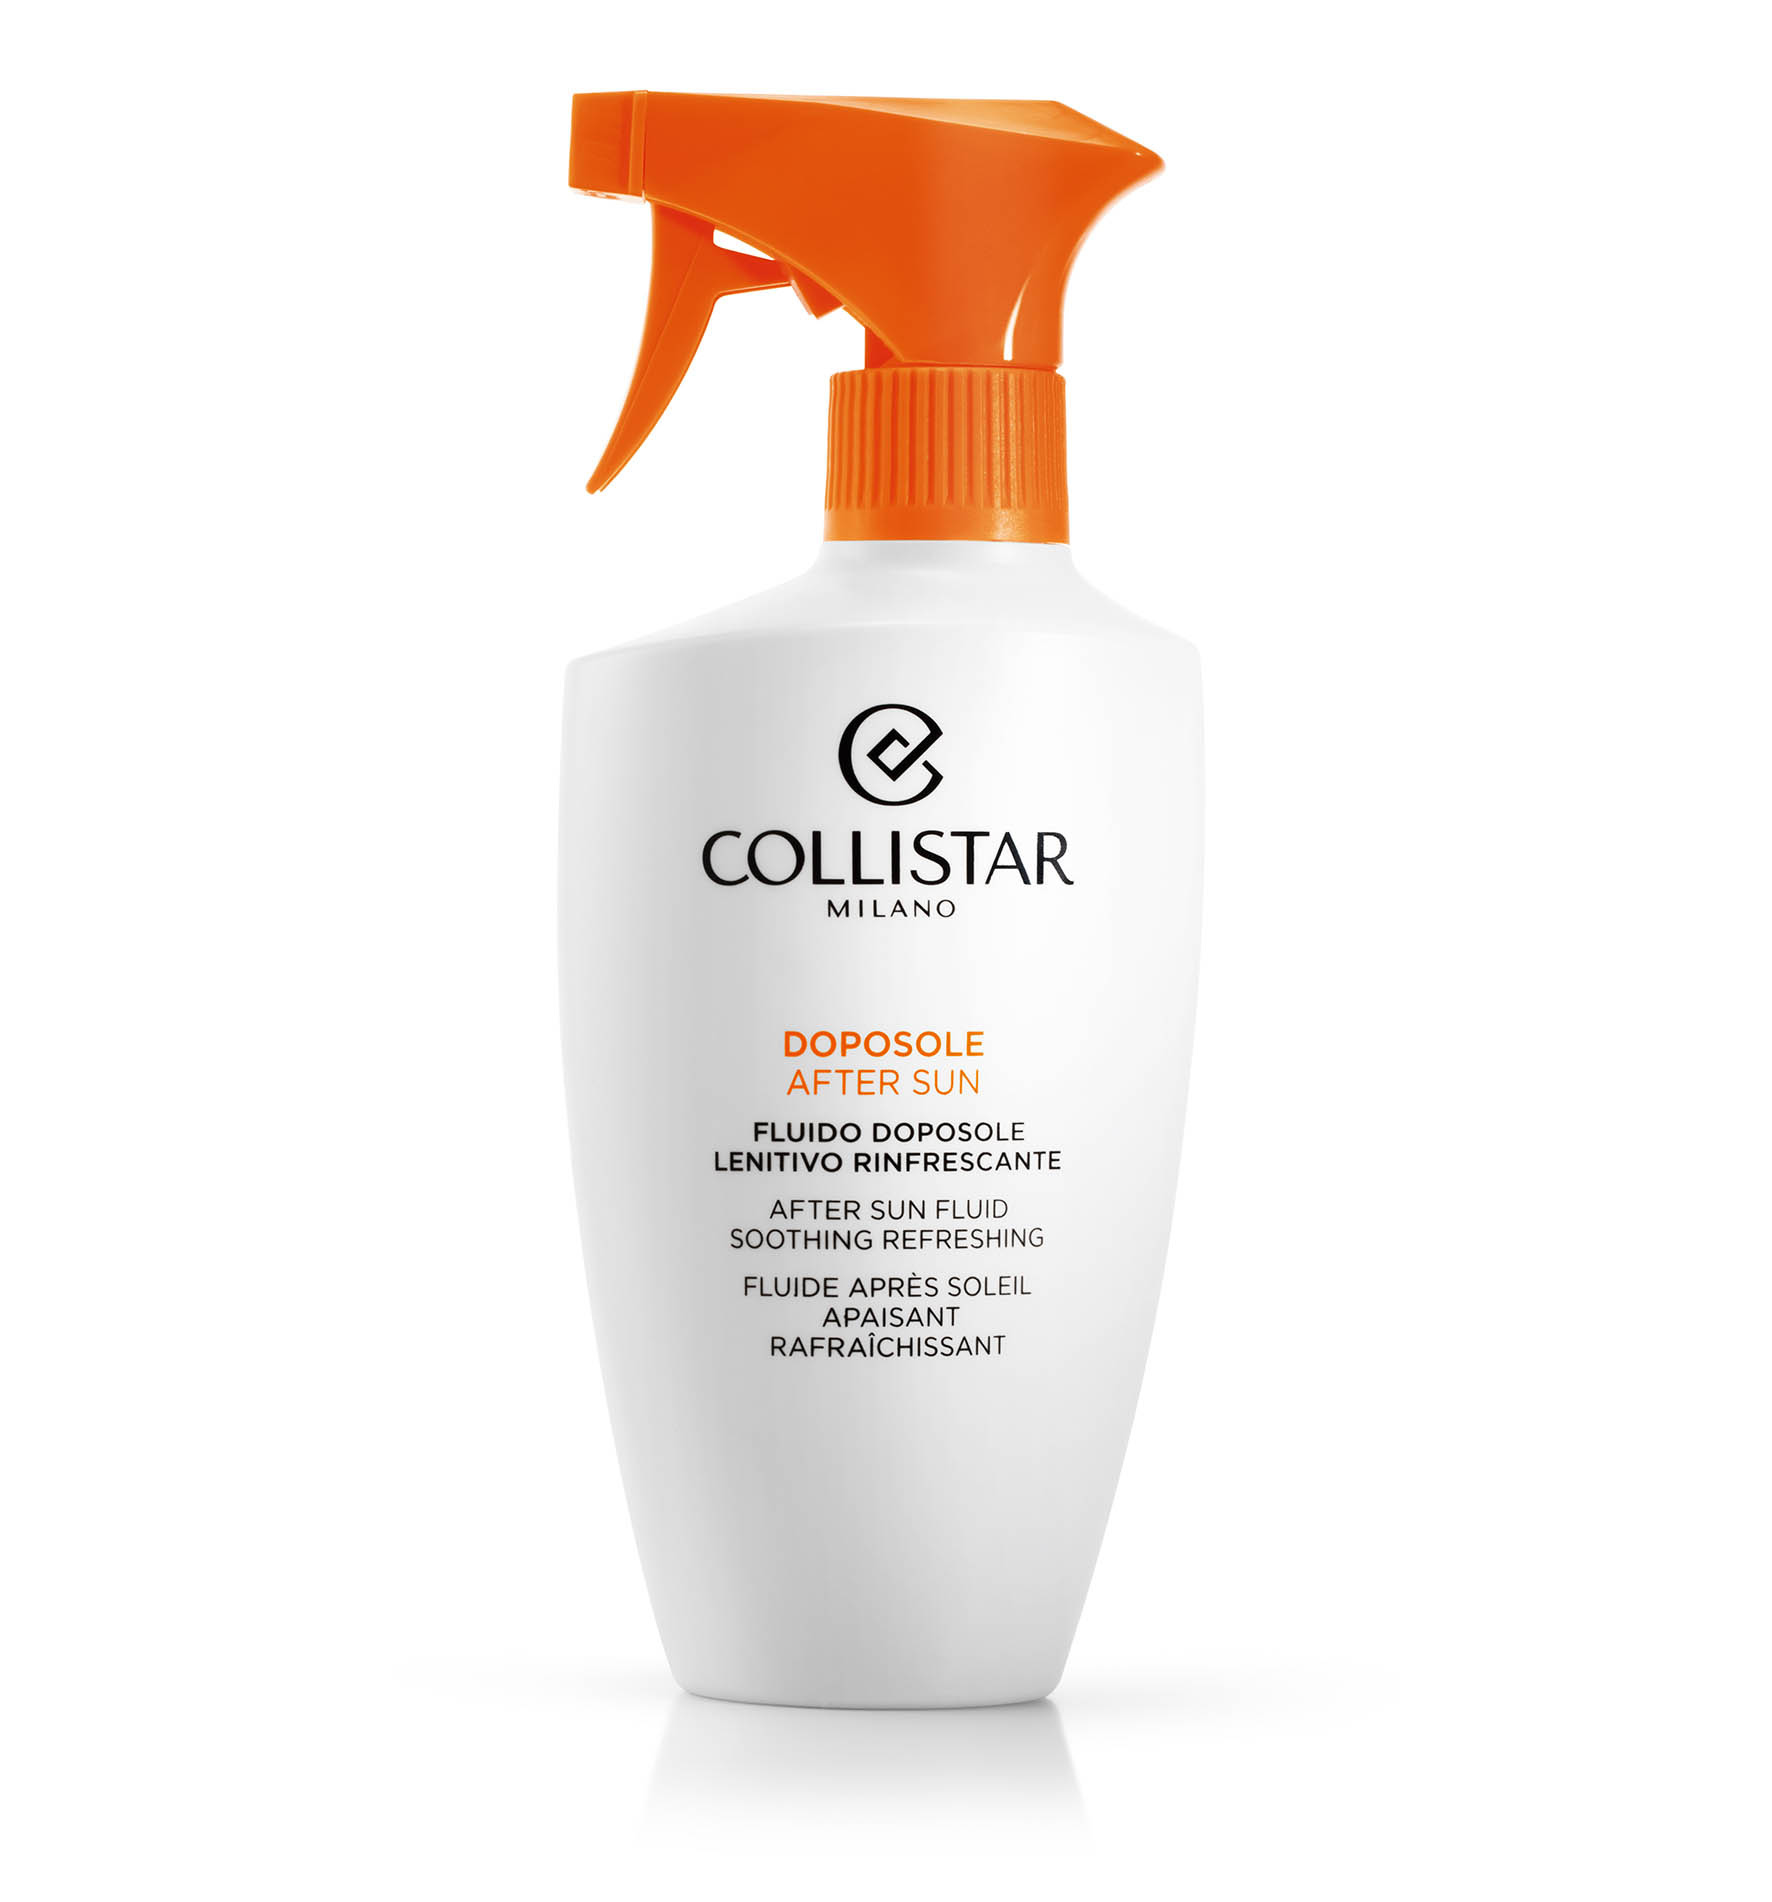 AFTER SUN FLUID SOOTHING REFRESHING - Aftersun | Collistar - Shop Online Ufficiale